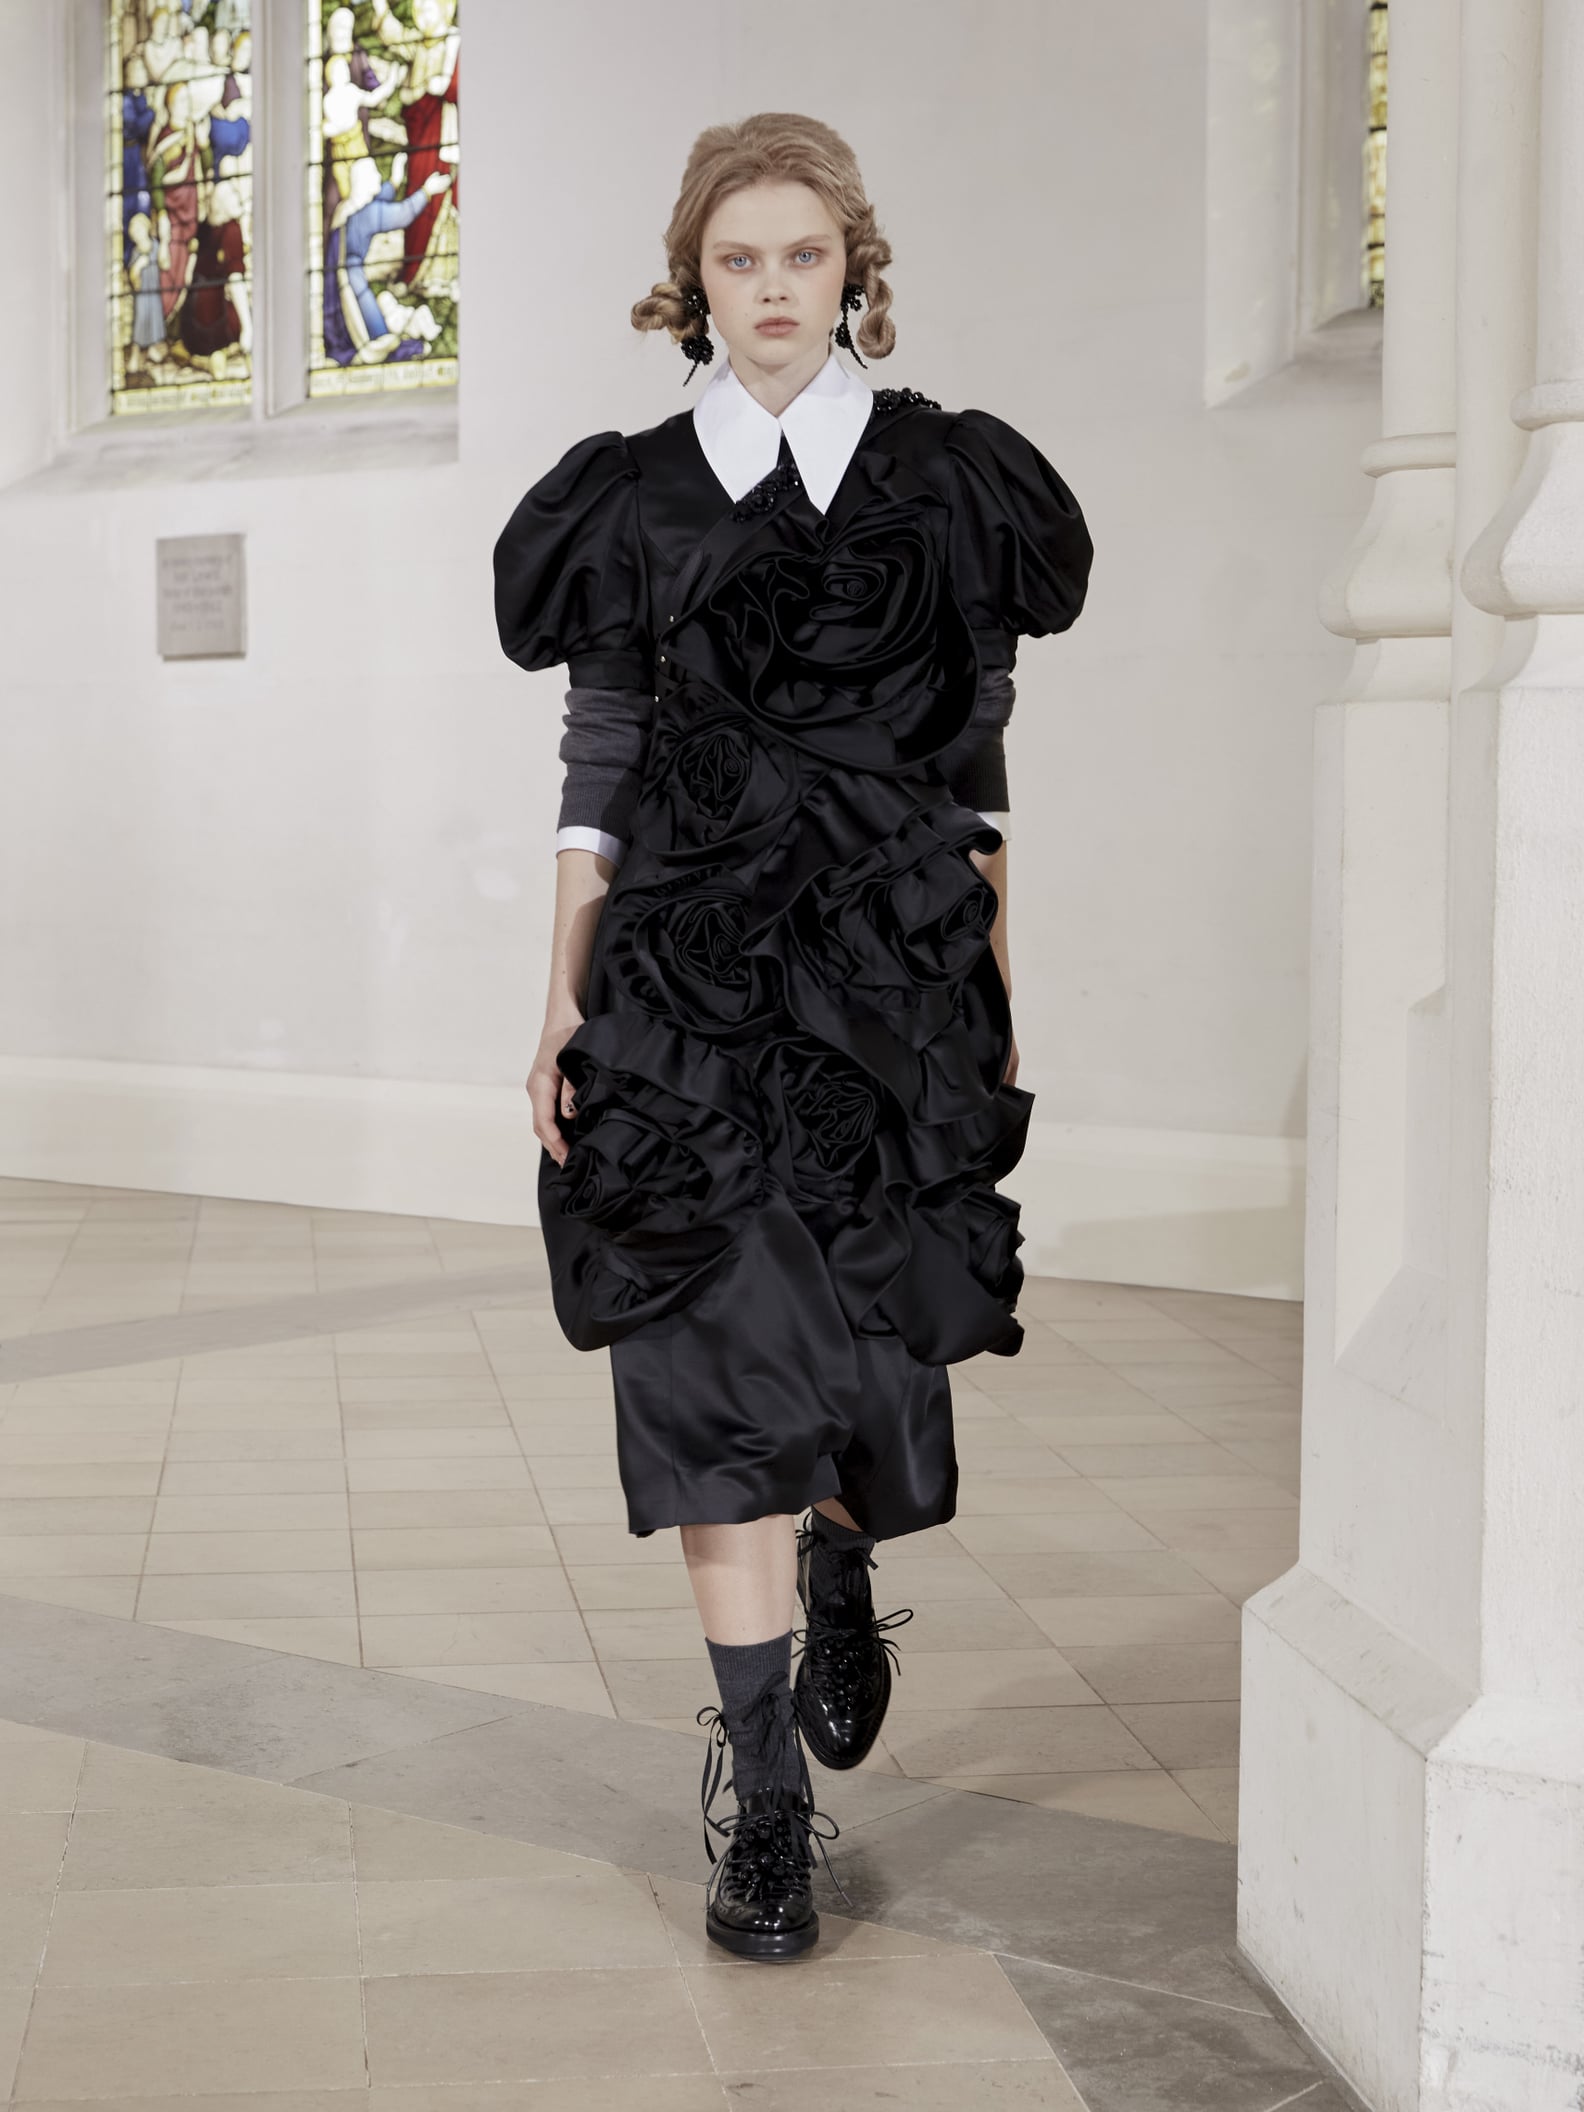 Simone Rocha Fall 2021 Features Patchwork and Regencycore | POPSUGAR ...